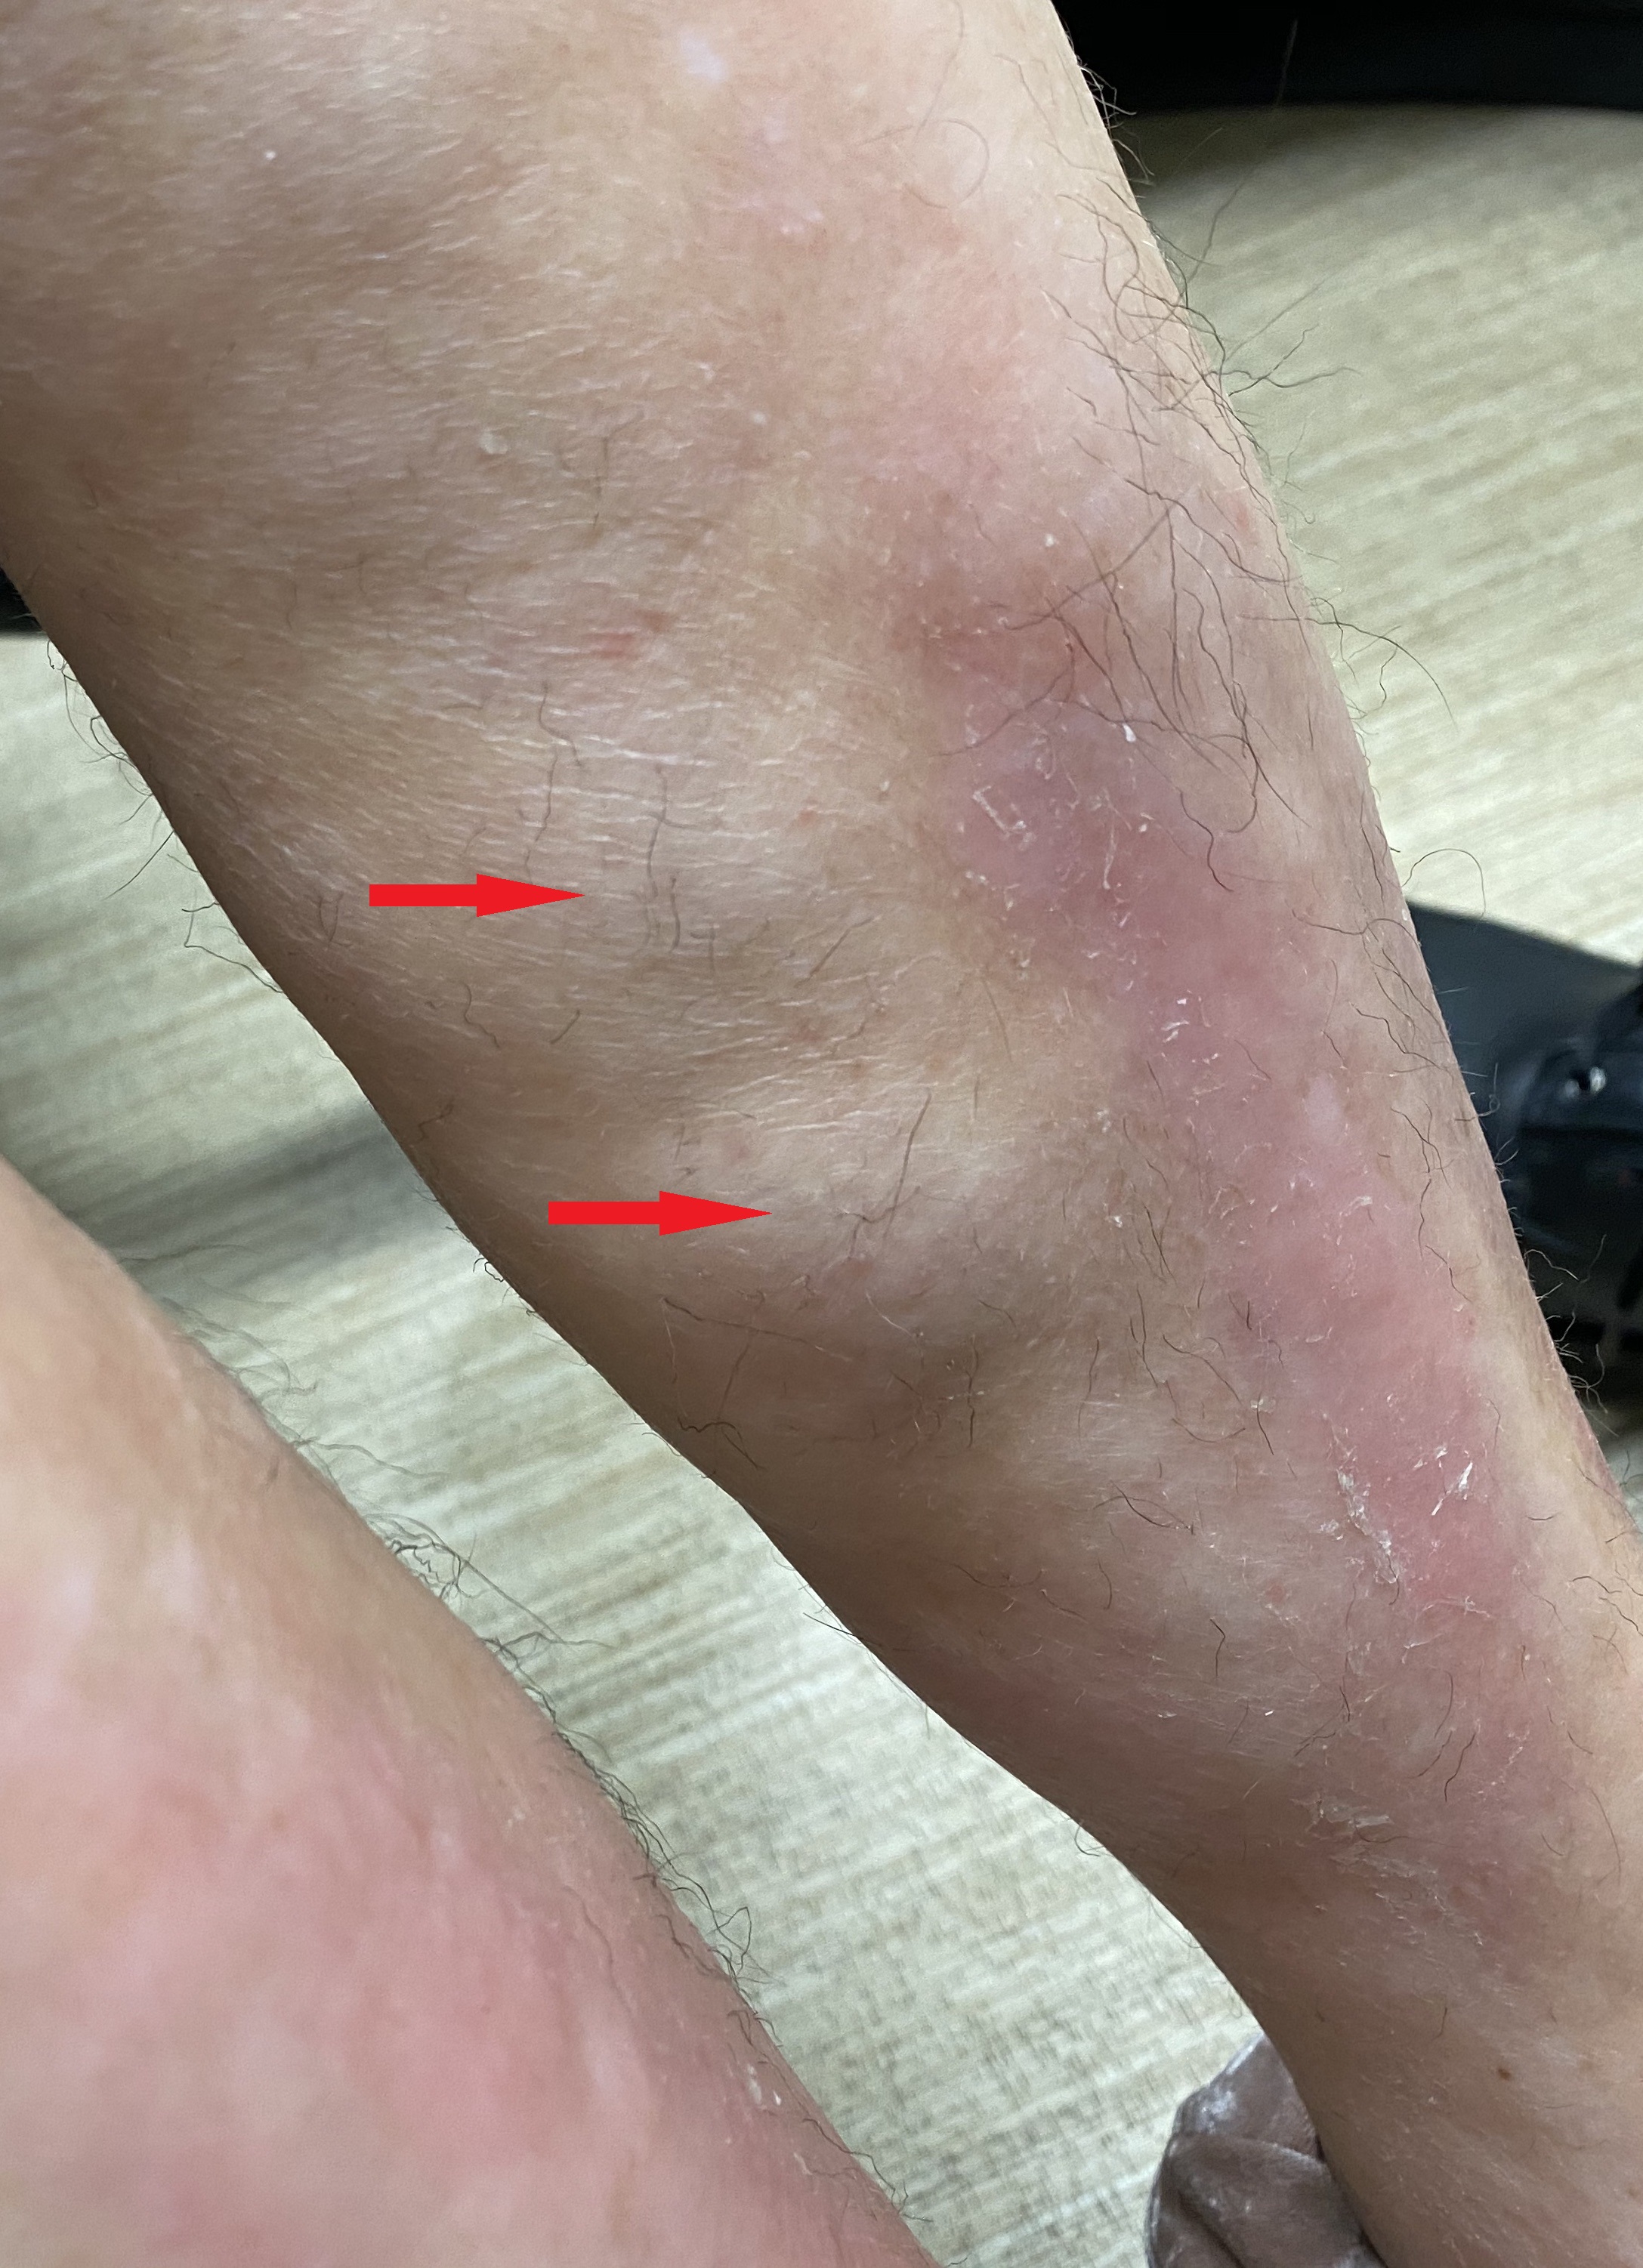 Extensive involvement of the skin of the lower extremities showing nodular areas of hypopigmentation, alopecia, and sclerosis (red arrows).